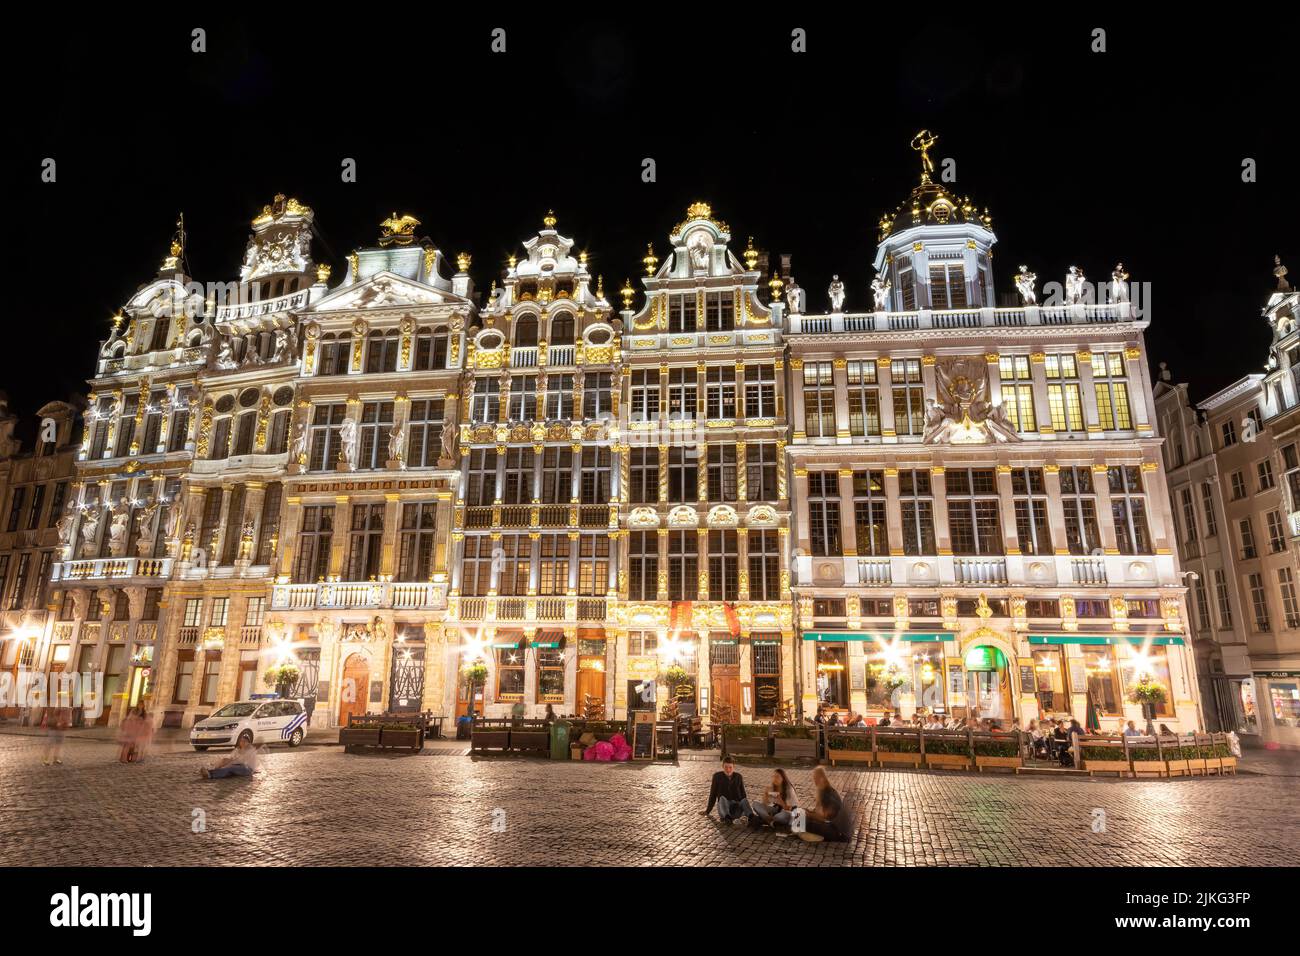 The landmark buildings in the Baroque style at the Grand Place illuminated at the night, Brussels, Belgium Stock Photo